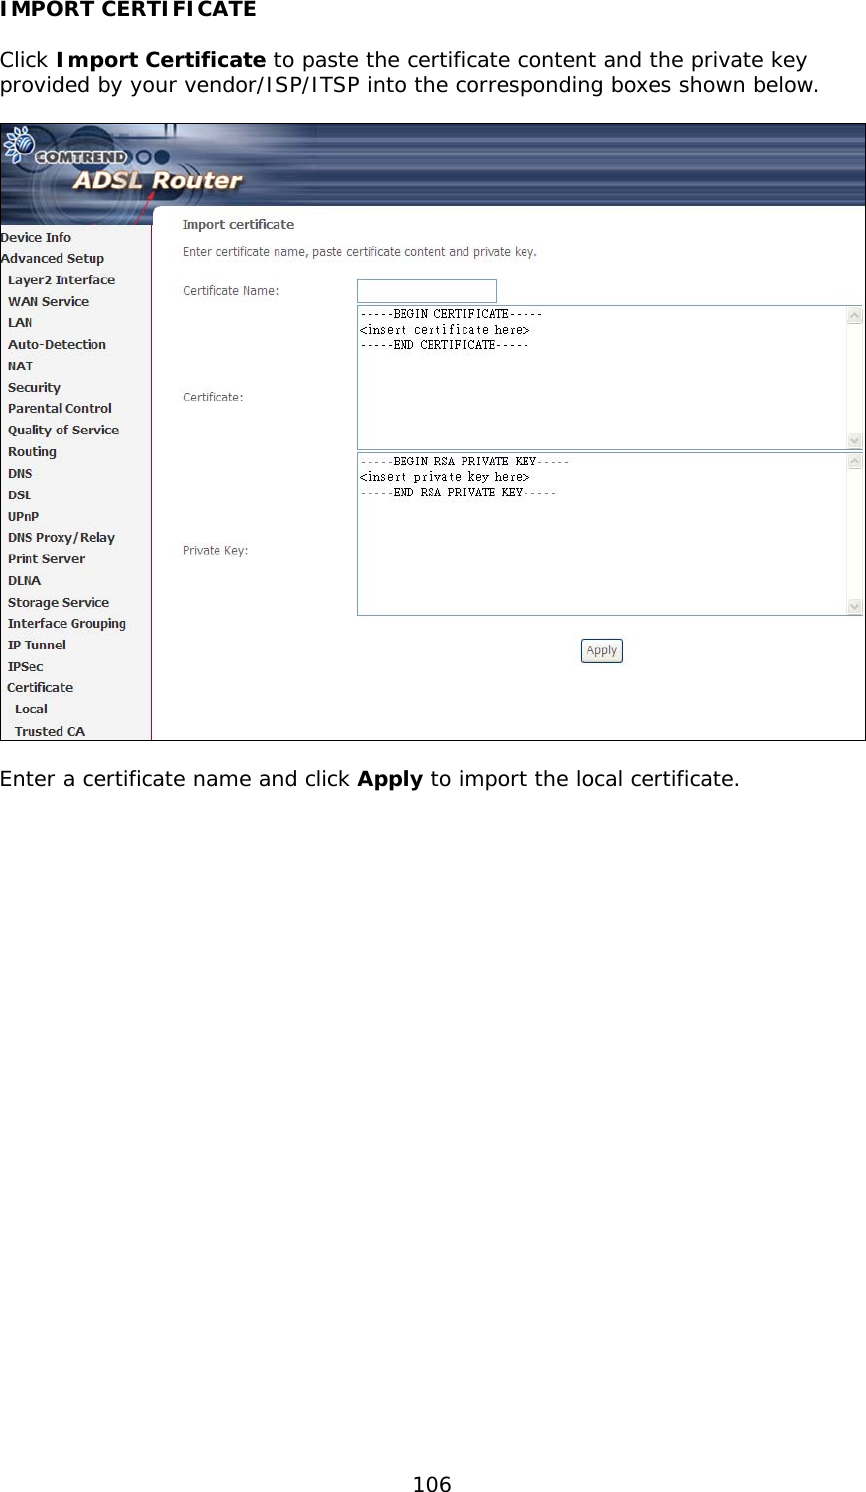  106 IMPORT CERTIFICATE  Click Import Certificate to paste the certificate content and the private key provided by your vendor/ISP/ITSP into the corresponding boxes shown below.    Enter a certificate name and click Apply to import the local certificate. 